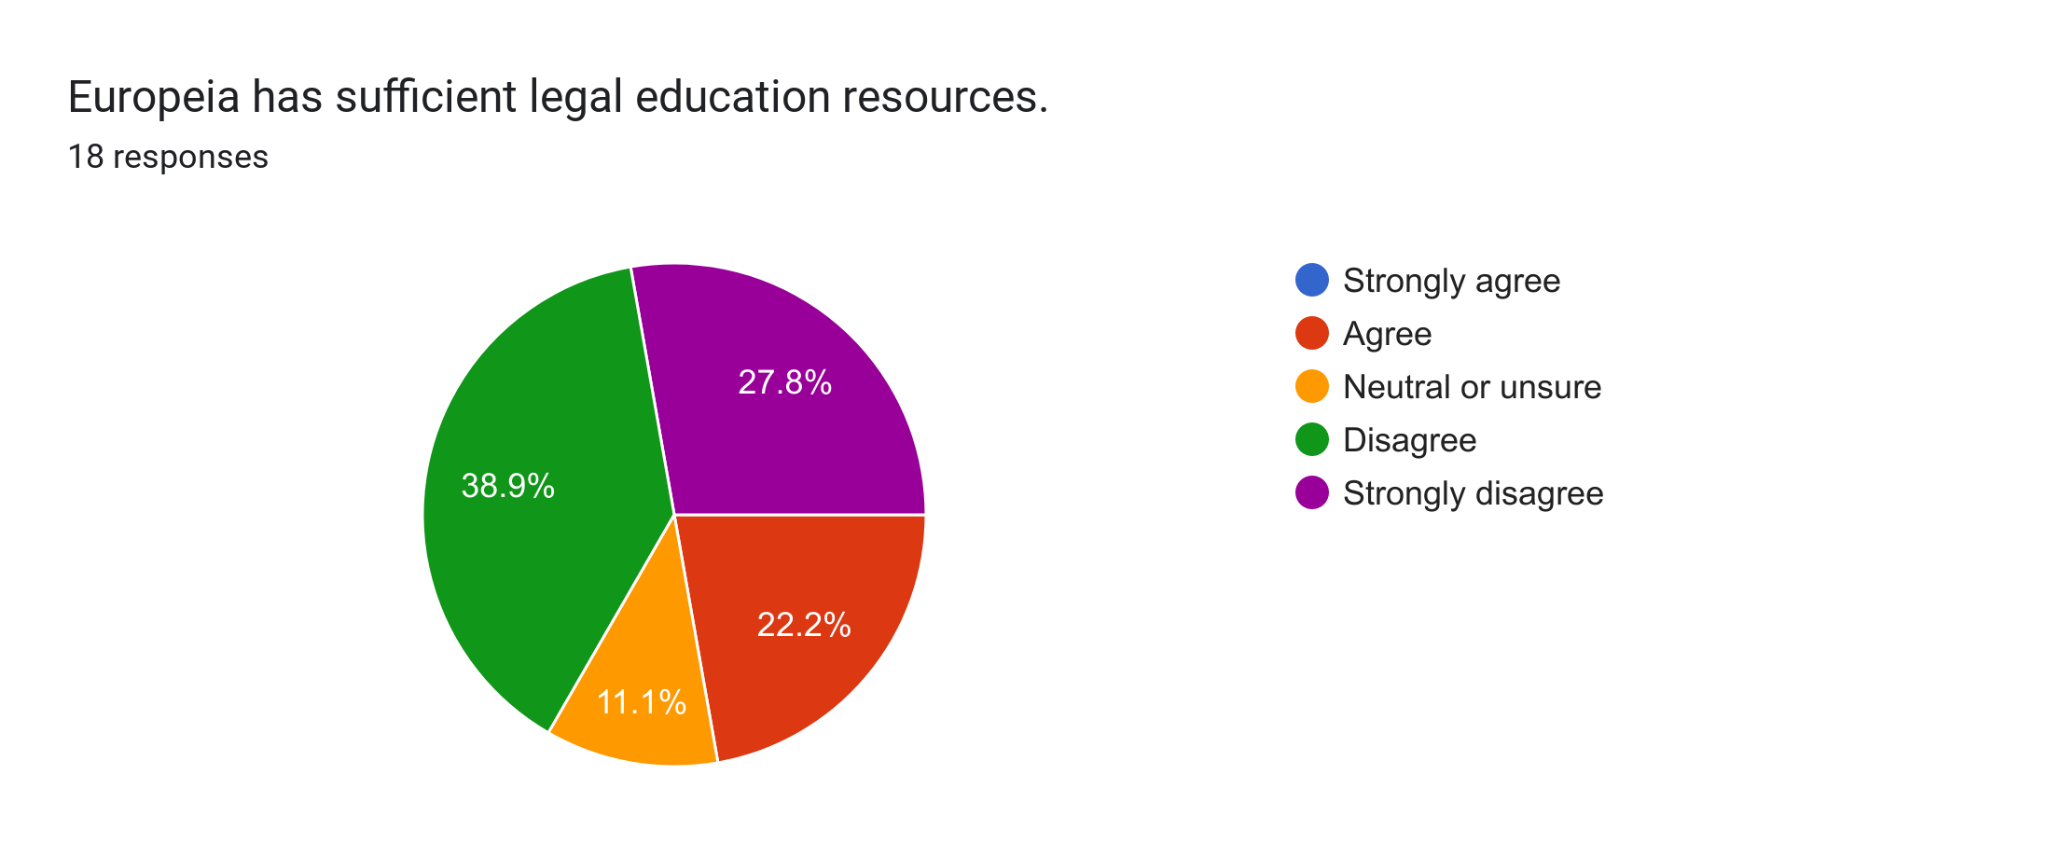 Forms response chart. Question title: Europeia has sufficient legal education resources.. Number of responses: 18 responses.